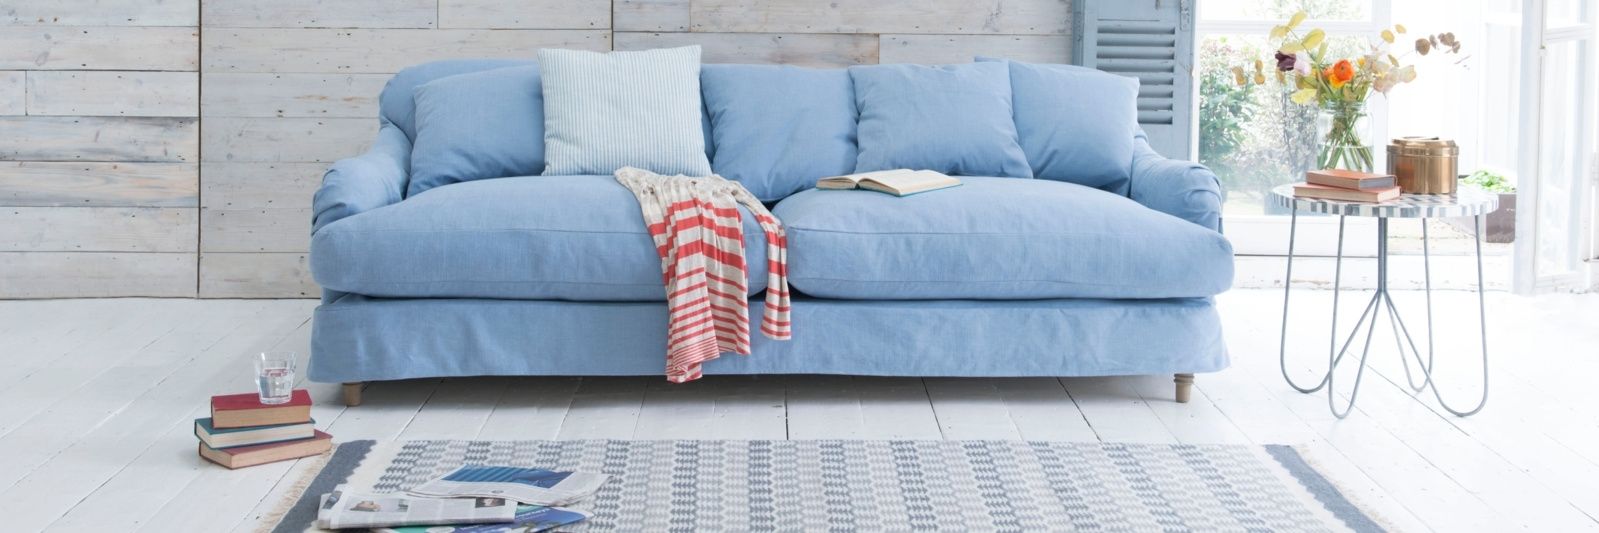 Loose Cover Sofas | Sofas With Removable Covers | Loaf With Regard To Sofas With Washable Covers (View 1 of 10)